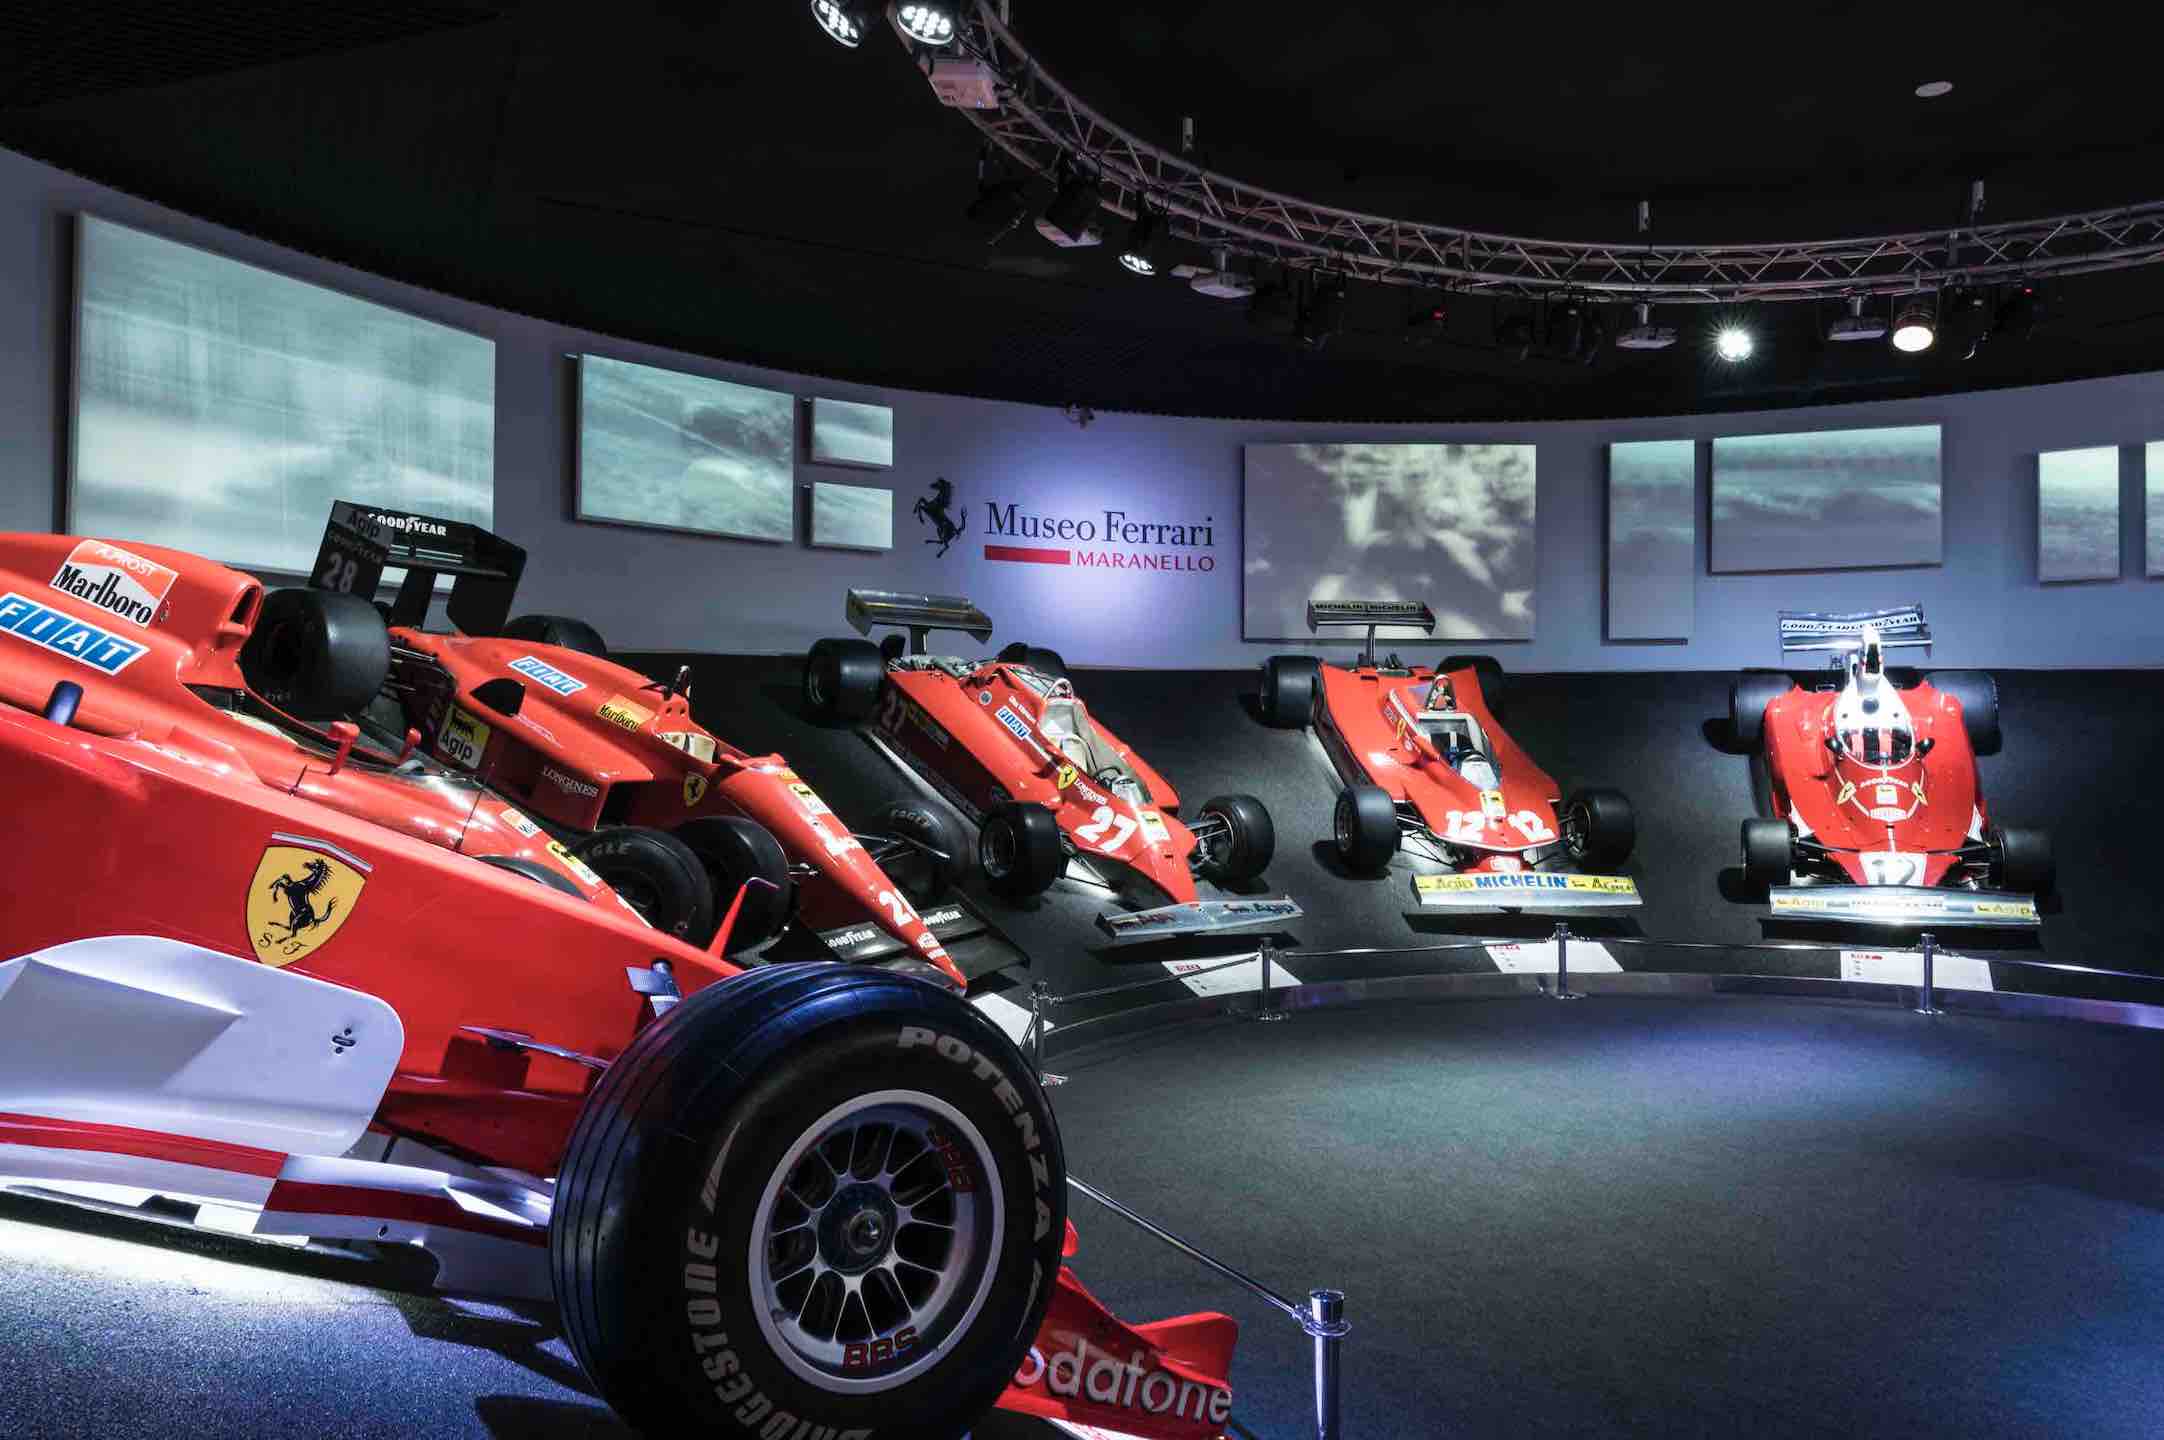 Things to do at the Ferrari Museum in Italy include looking at its race cars